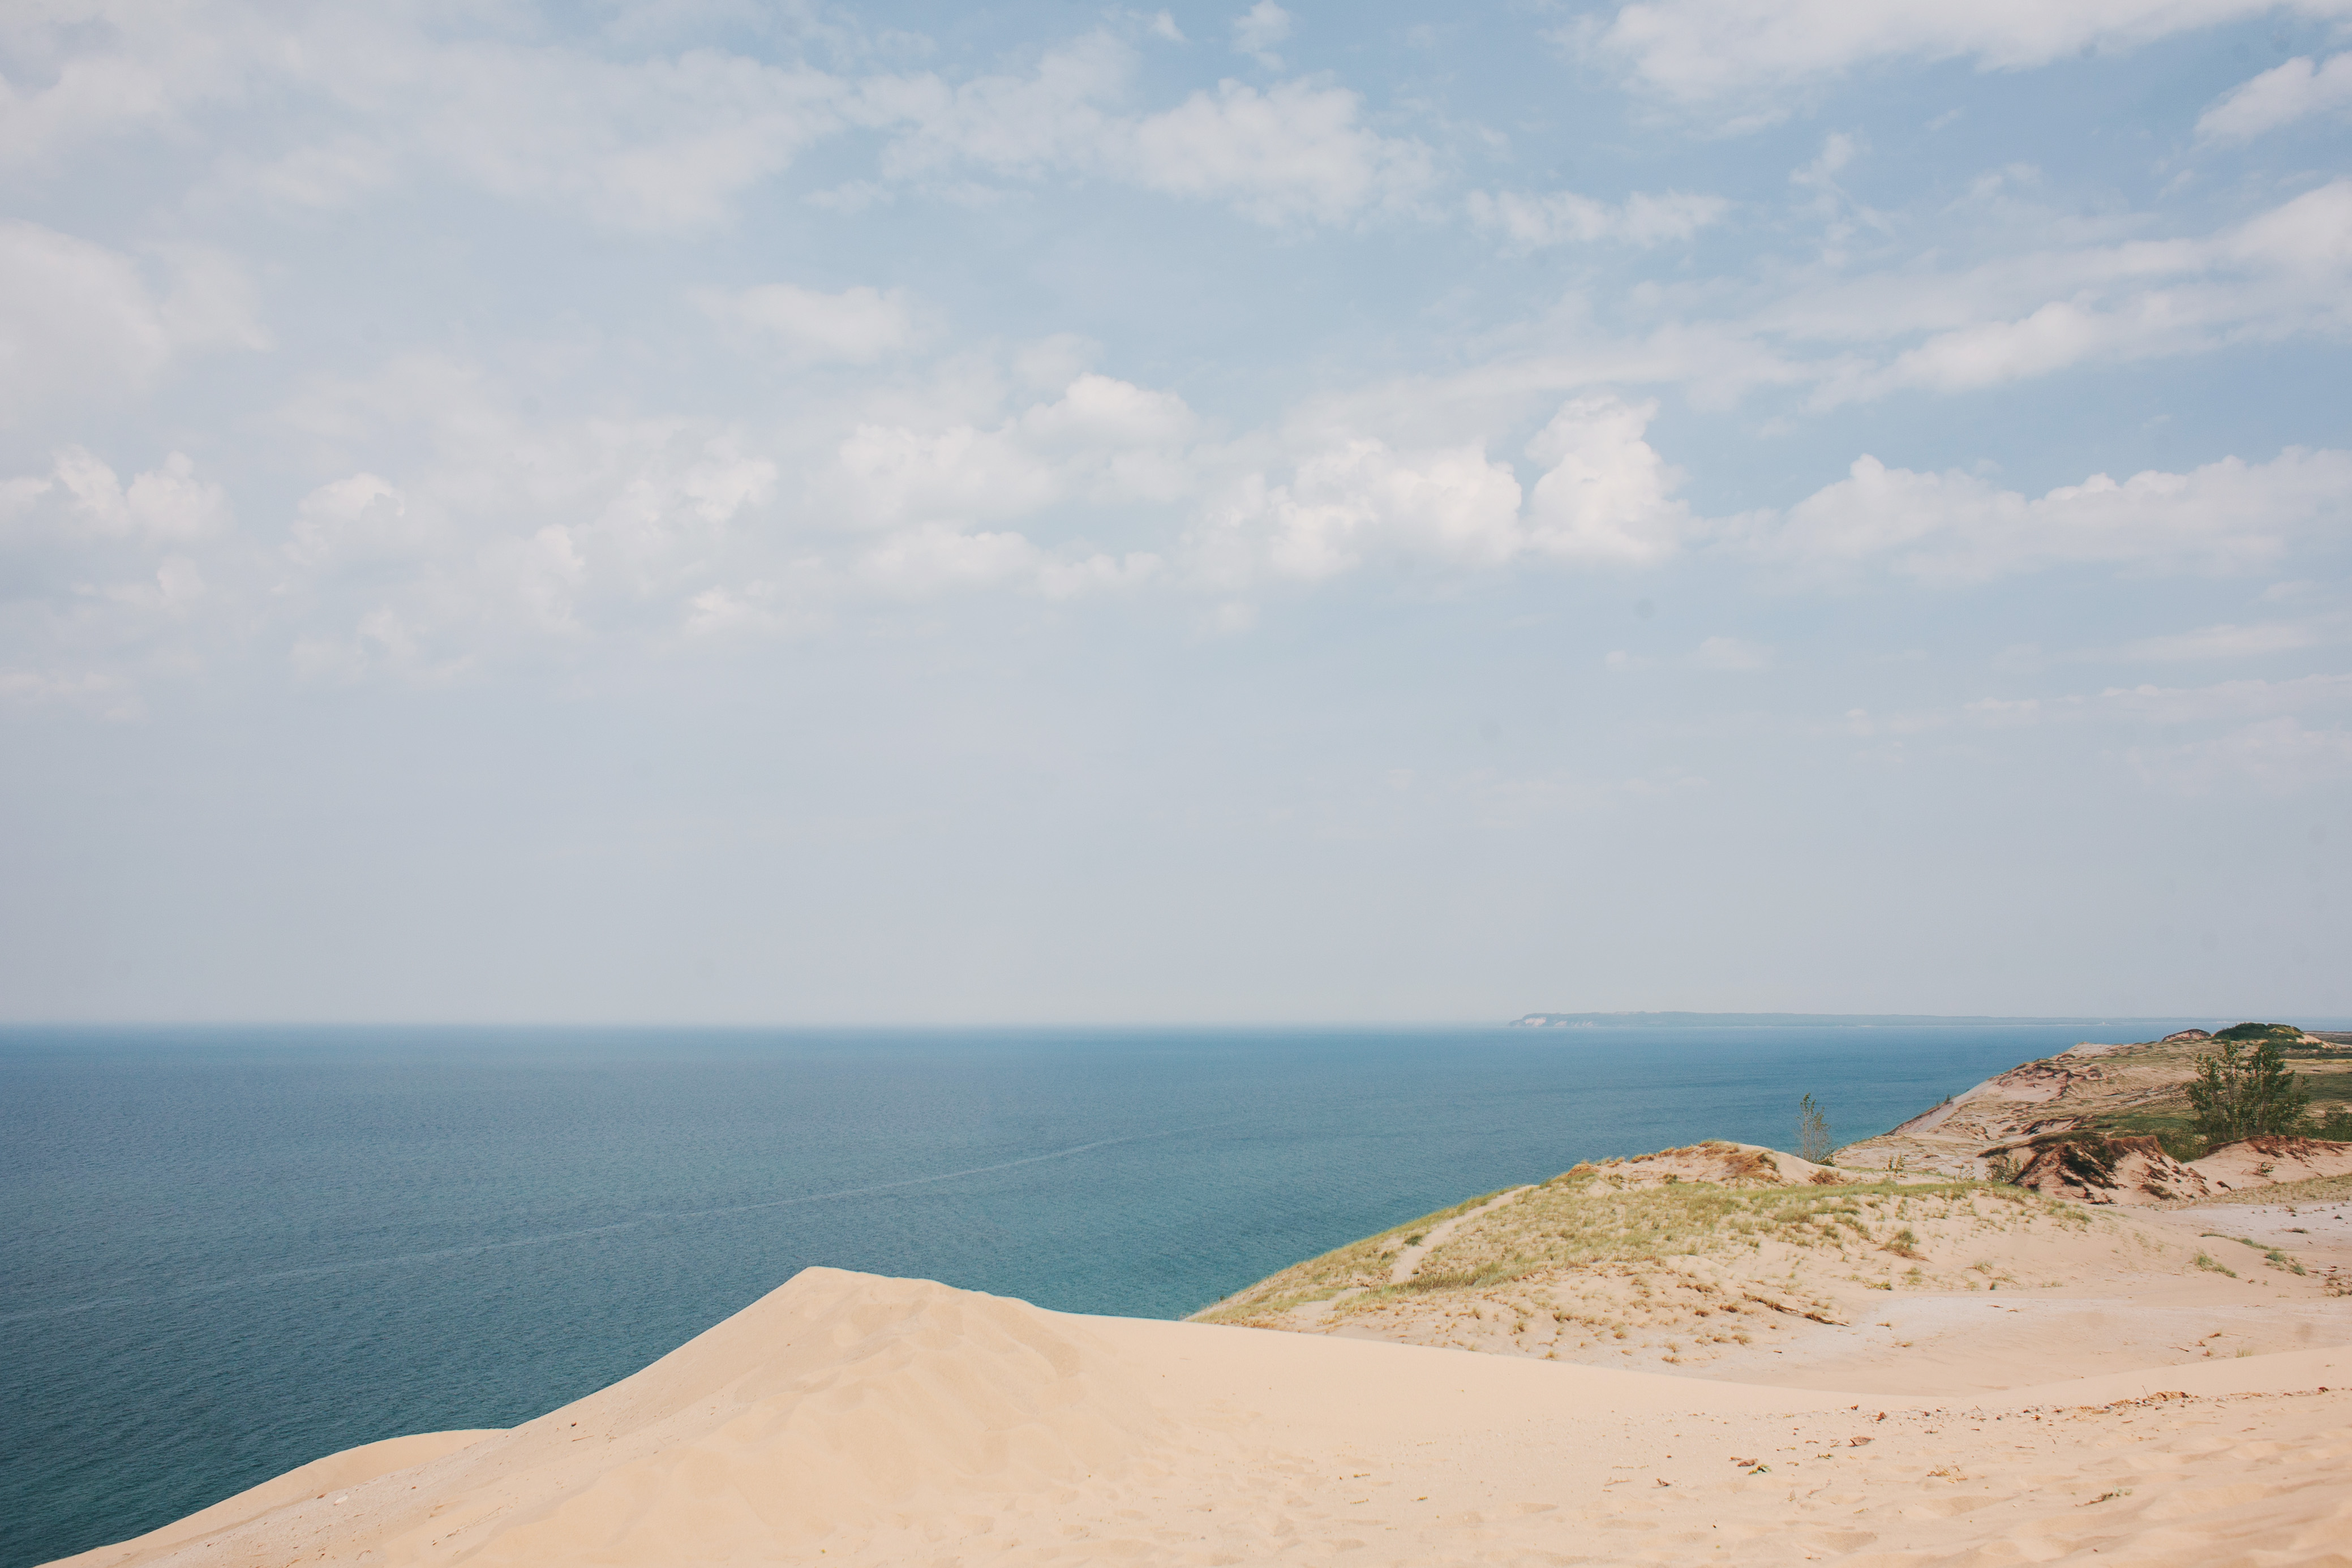 scenery of sand dunes with blue lake michigan waters behind